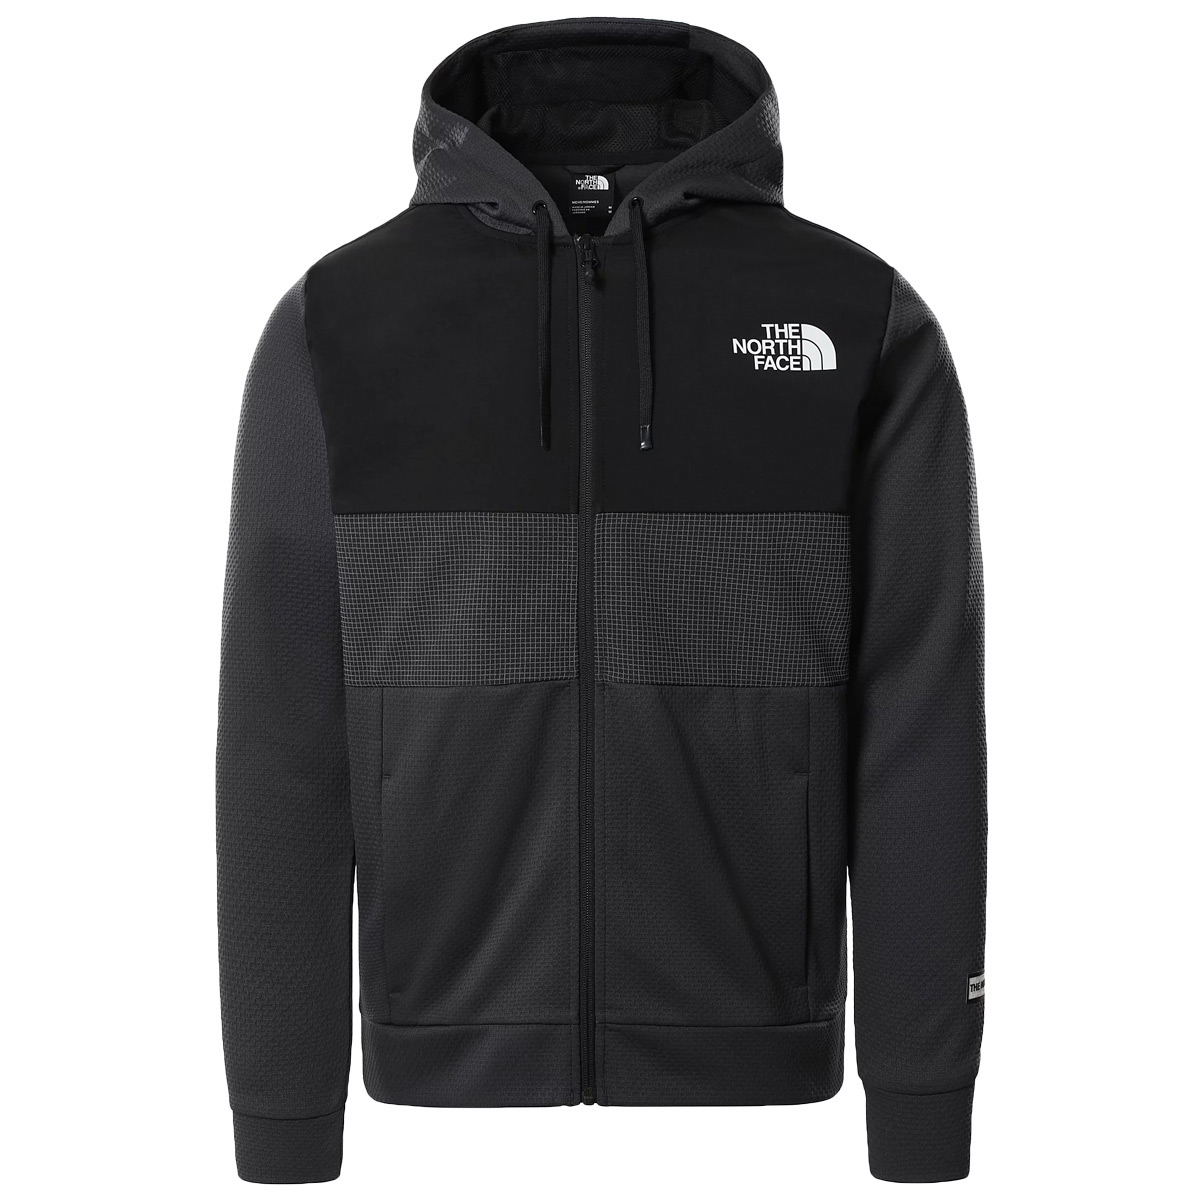 The North Face Overlay Jacket